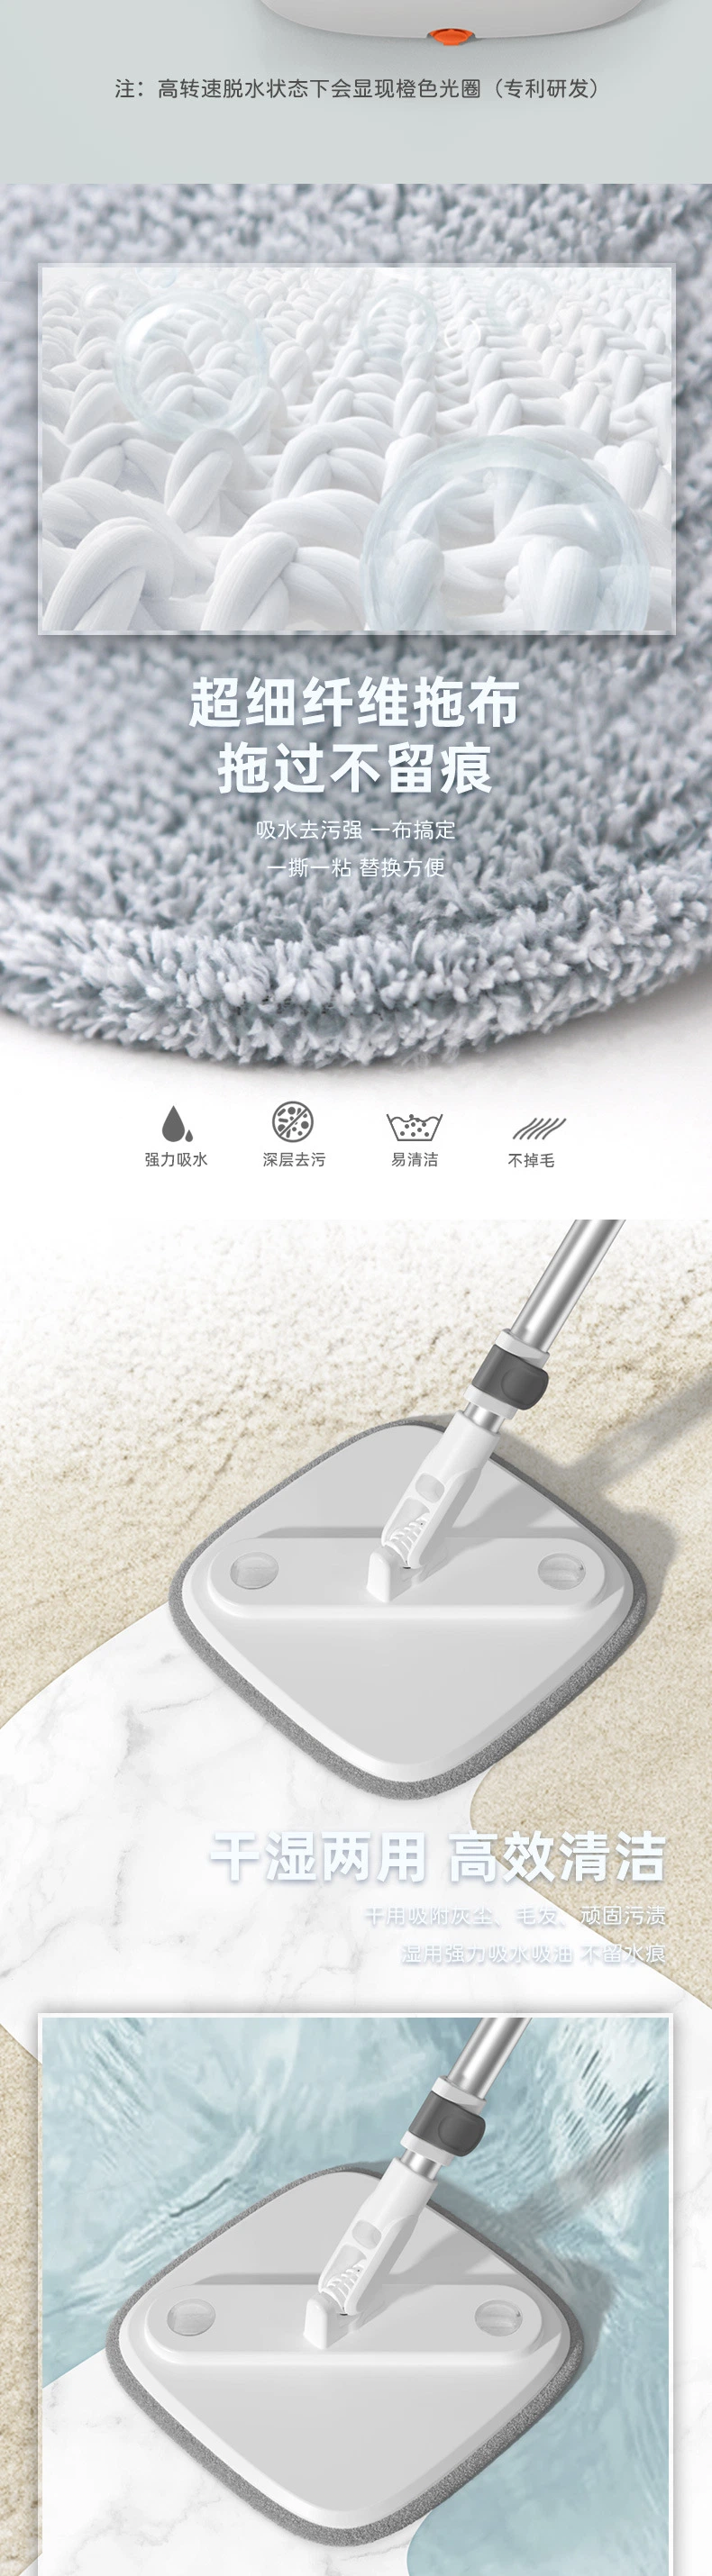 Cleaning and Sewage Separation Plate Mop Flat Floor Mop and Pads Mop for Floor Cleaning with X Microfiber Pads Wet and Dry Use Household Cleaning Tools